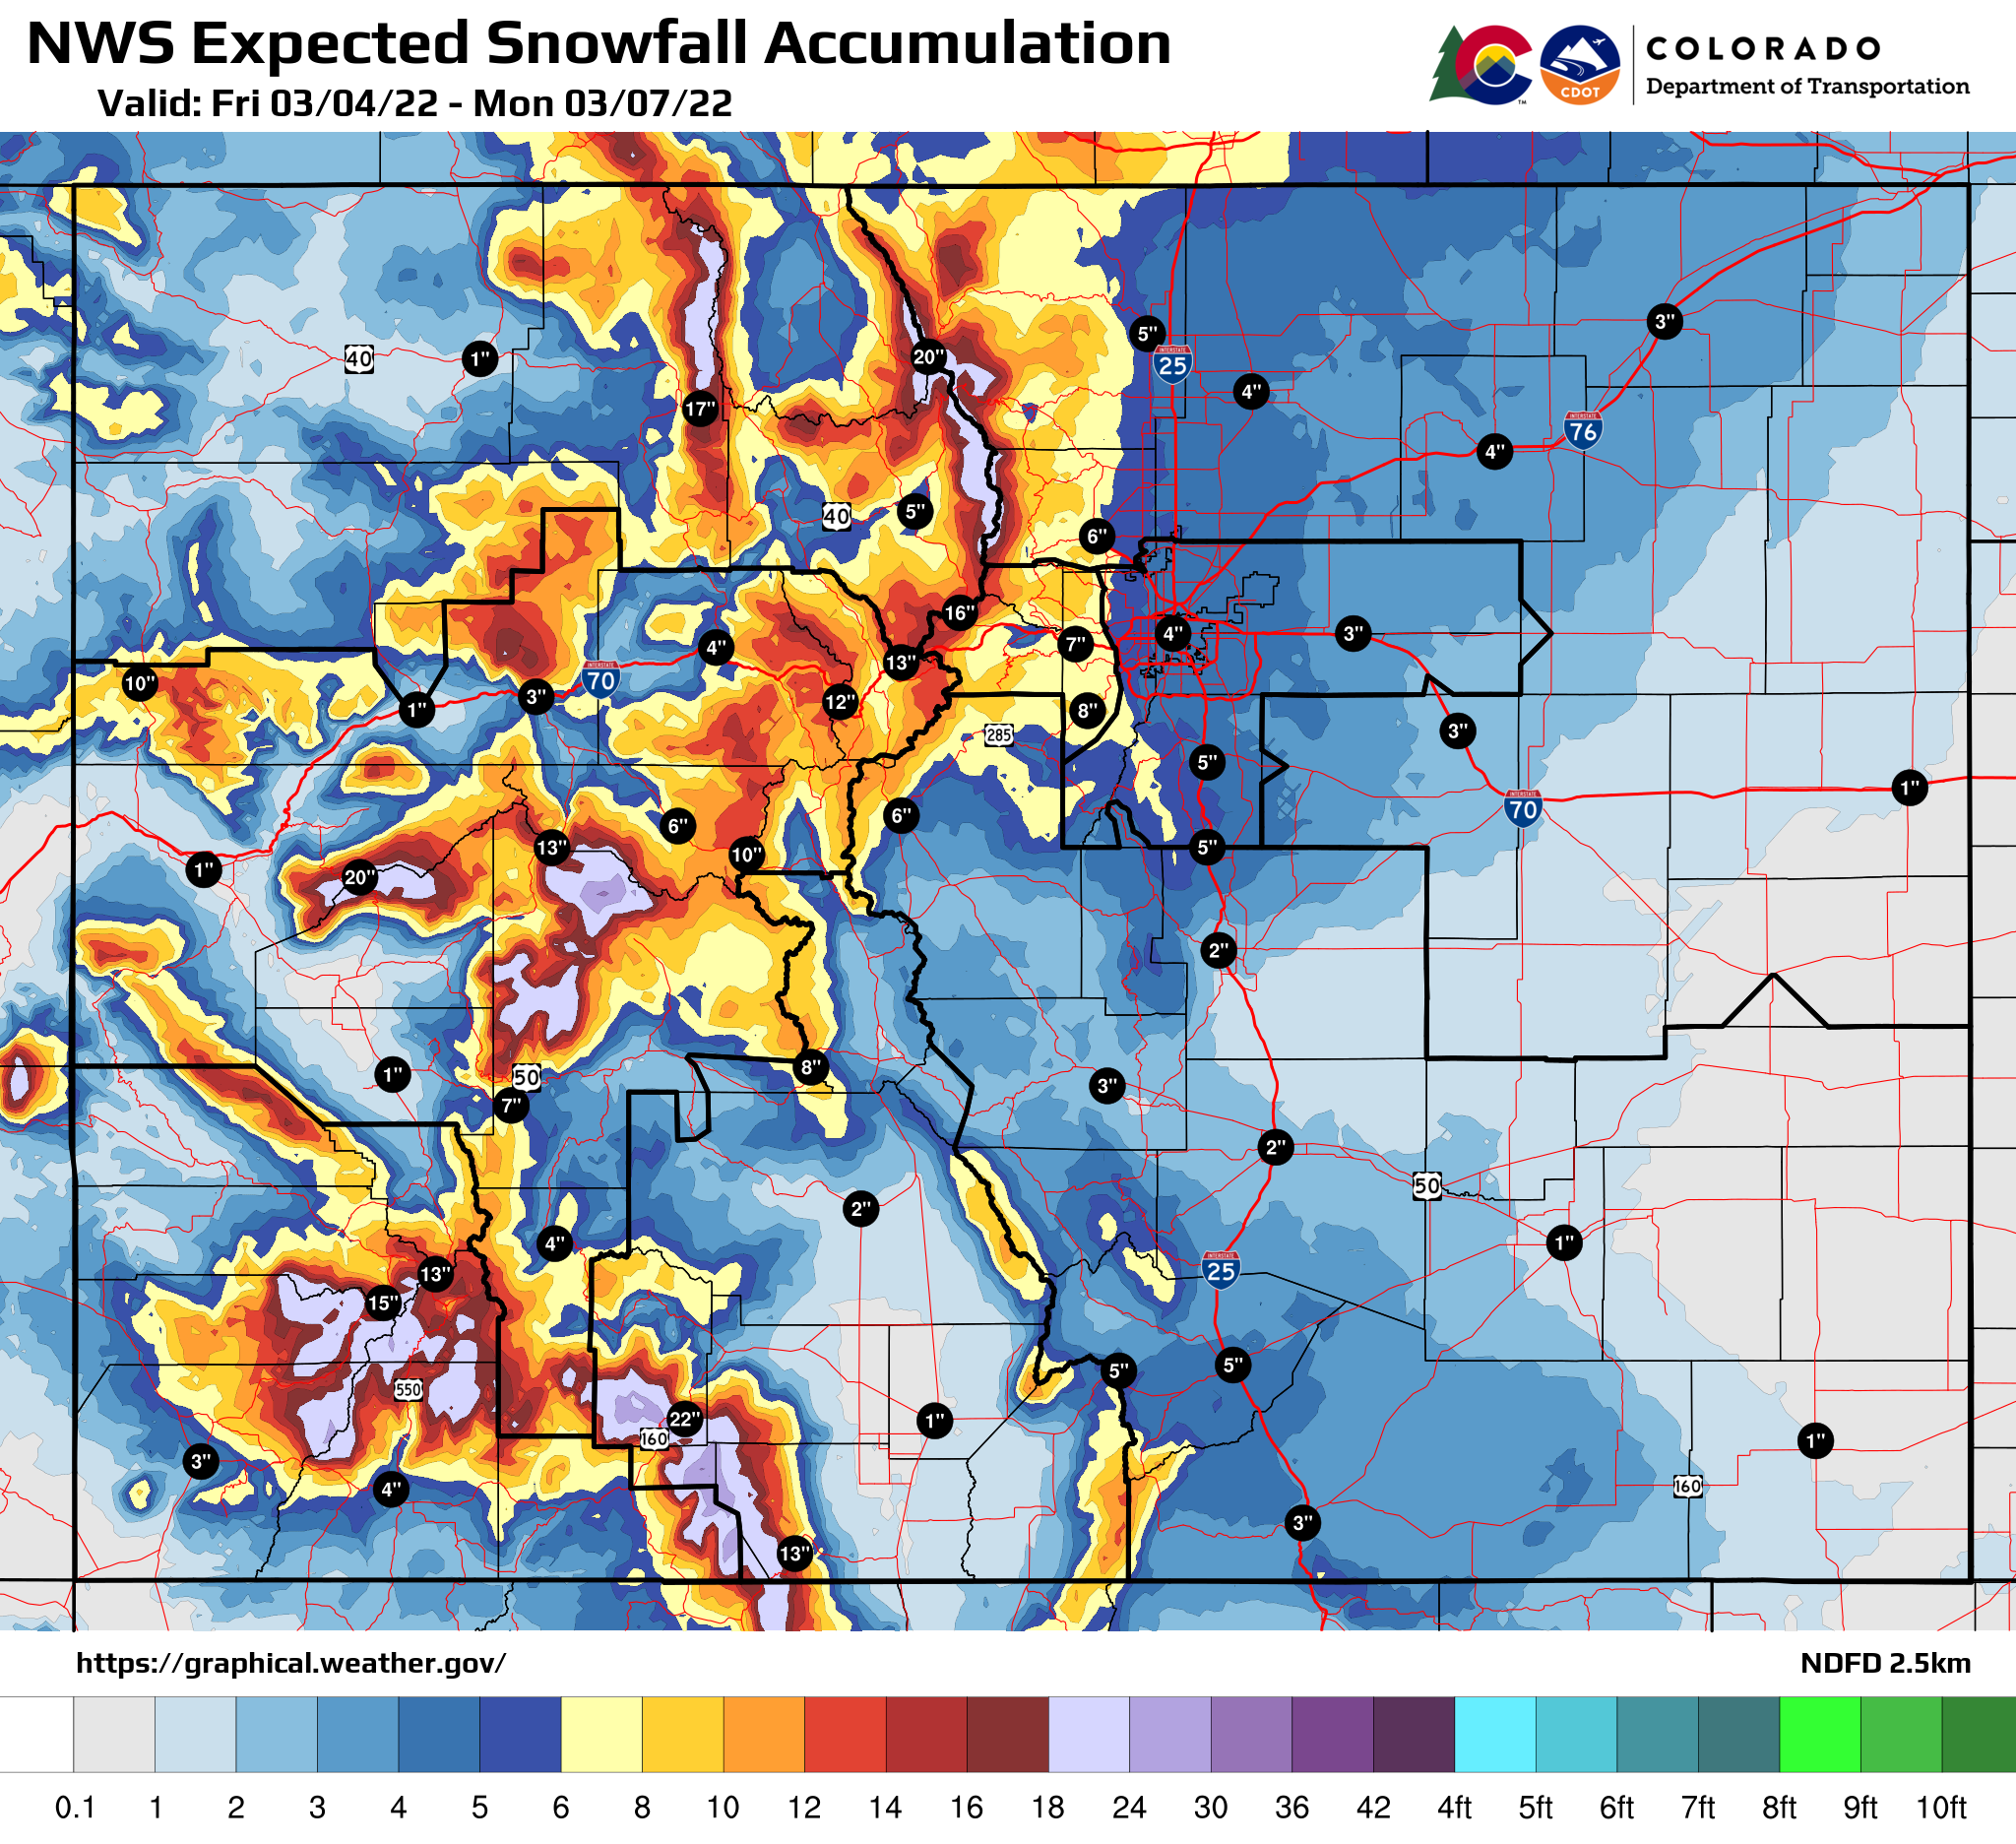 Expected Snowfall Accumulation March 2022 detail image